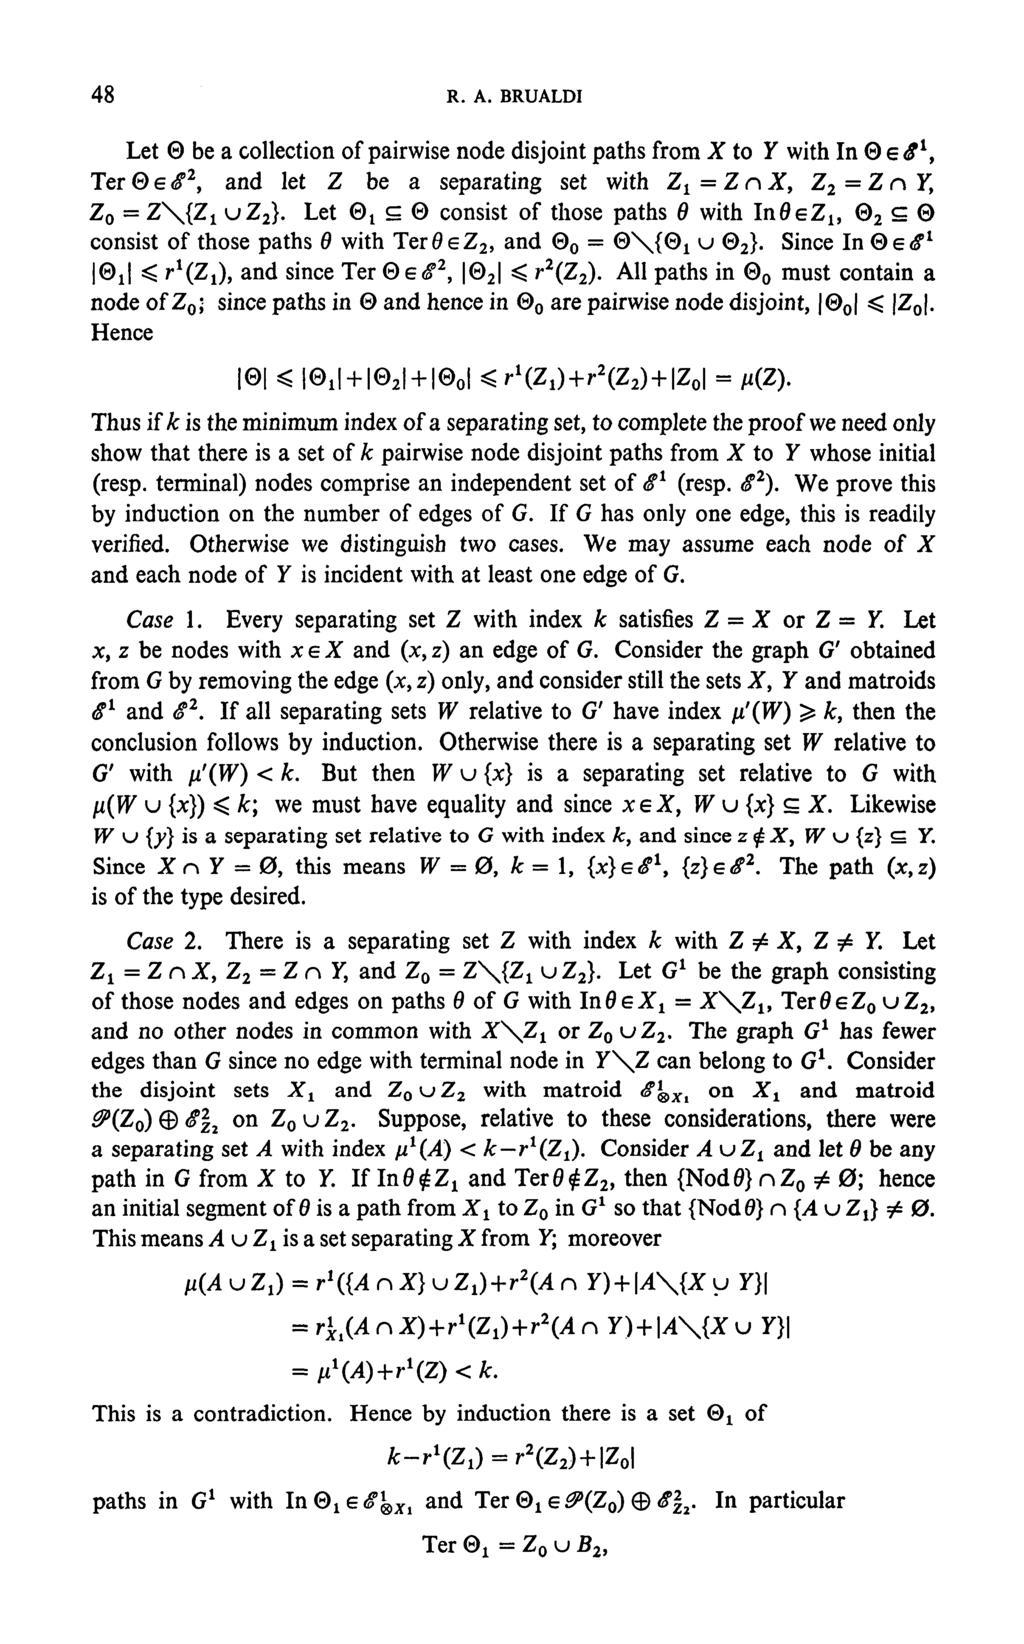 48 R. A. BRUALDI Let 0 be a collection of pairwise node disjoint paths from X to Y with In Ter0eS 2, and let Z be a separating set with Z 1 =ZnX, Z 2 =Zr>Y, Z o = Z\{Z t vz 2 ). Let 0! s 0 consist of those paths 0 with In0eZ 1} 0 2 g0 consist of those paths 0 with Ter0eZ 2, and 0 o = 0\{0 x u 0 2 }.